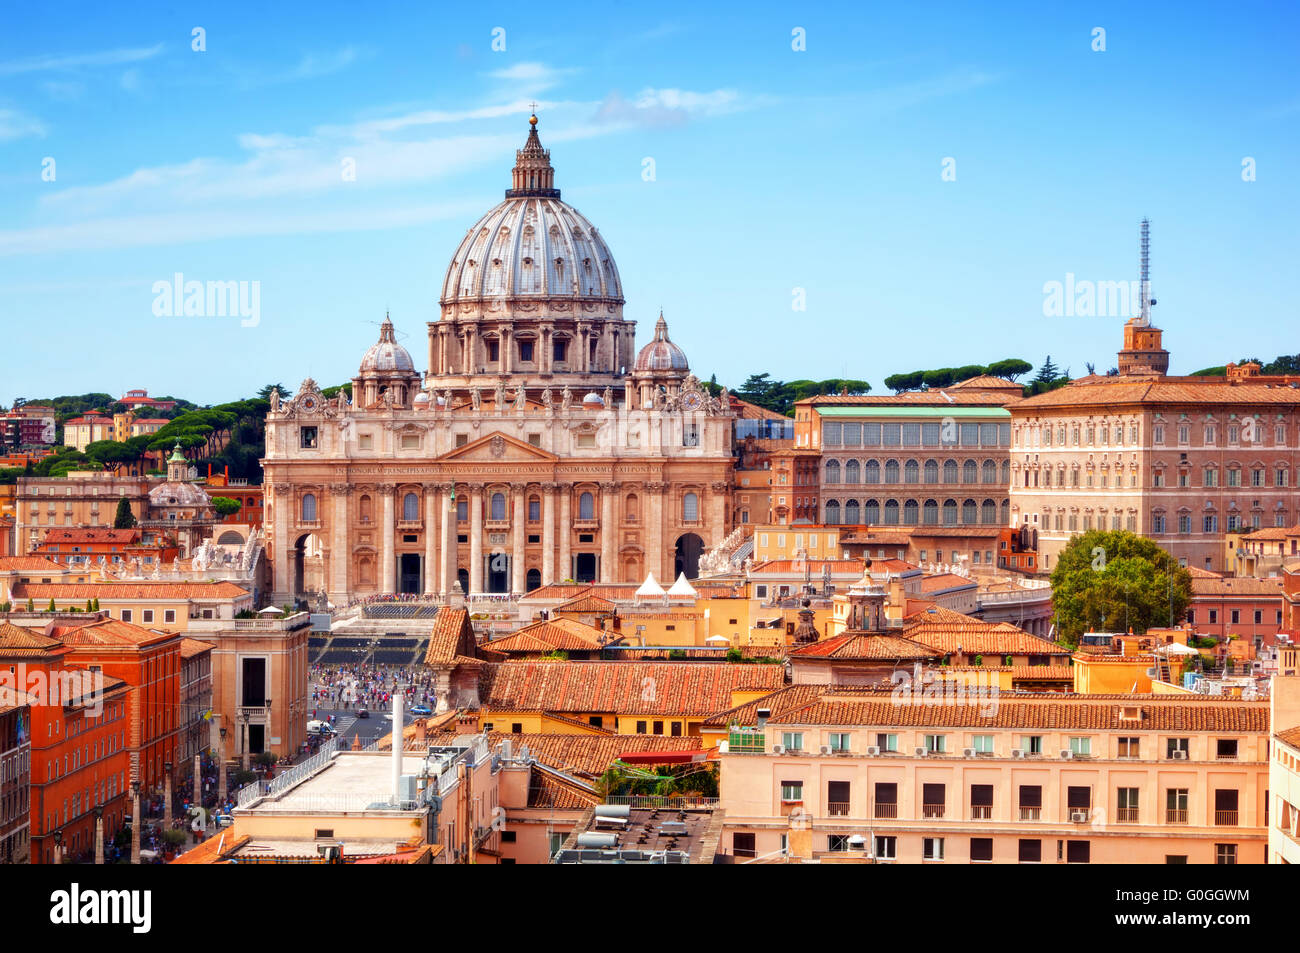 Vatican City. St. Peter's Basilica and Vatican museums. Stock Photo